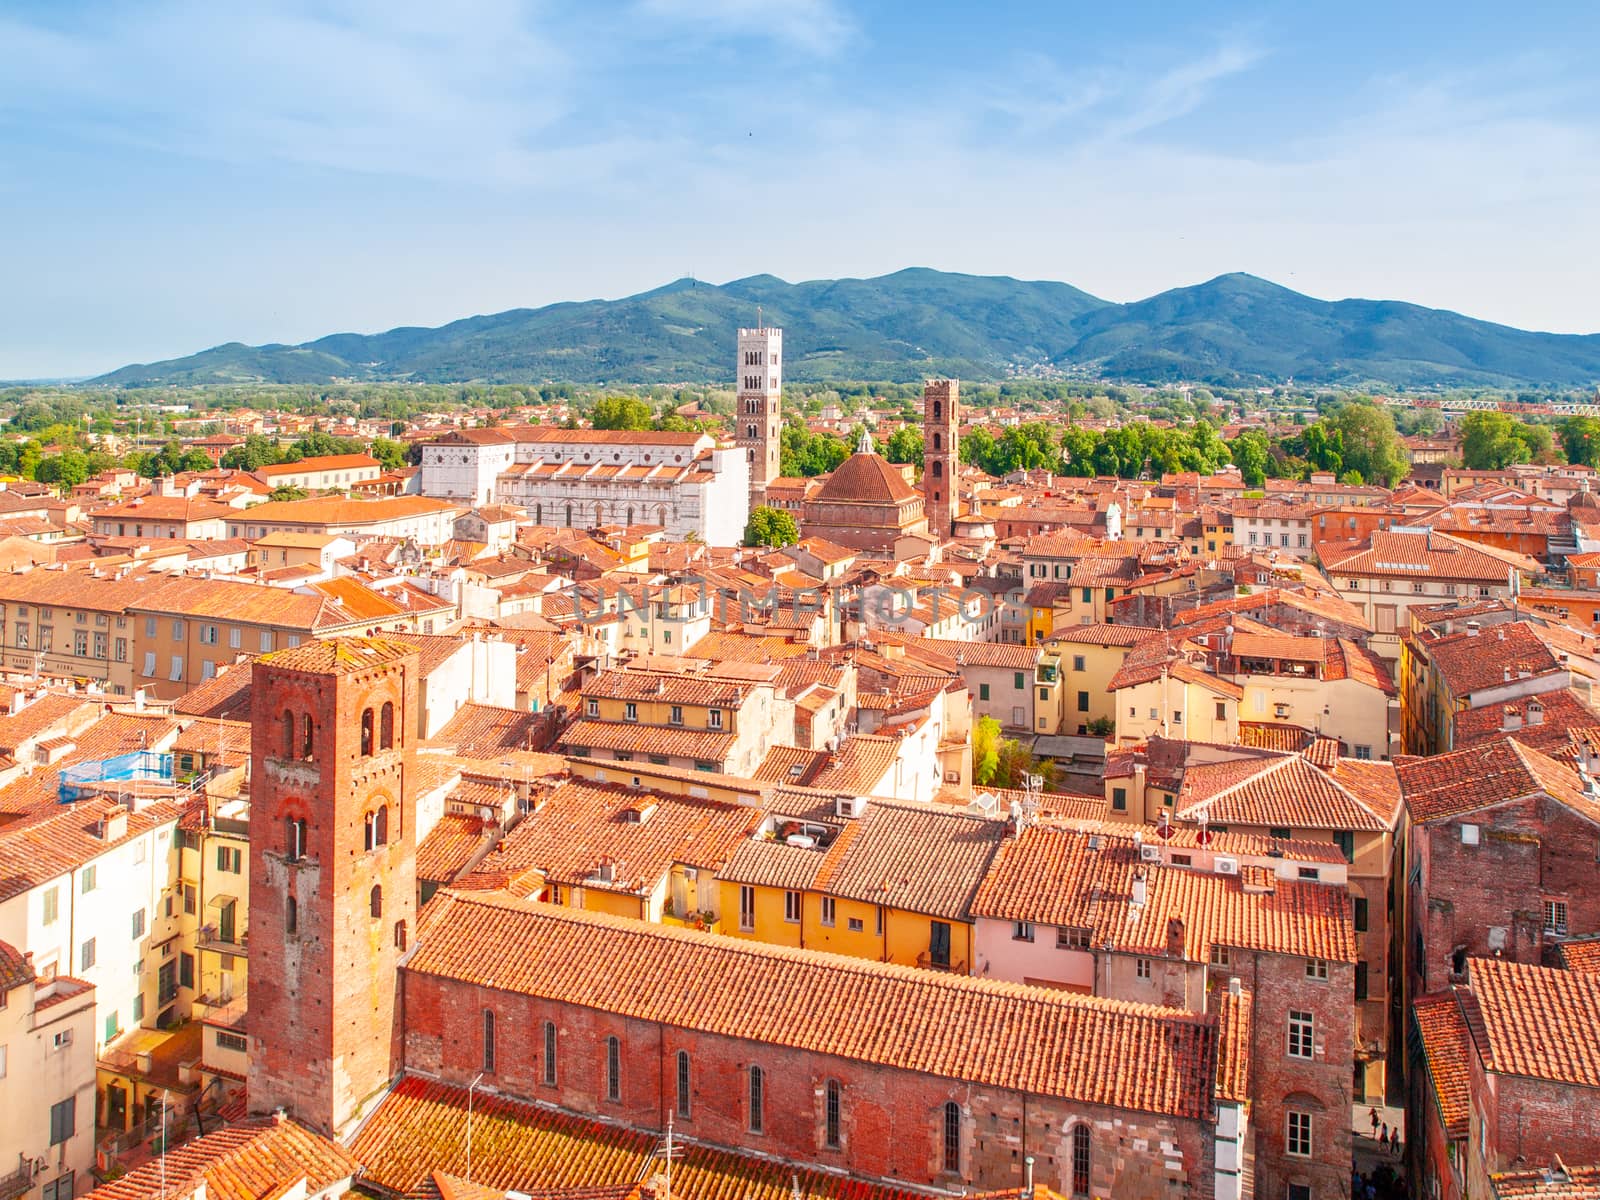 Lucca summer skyline with St Martin Cathedral and bell towers, Tuscany, Italy.